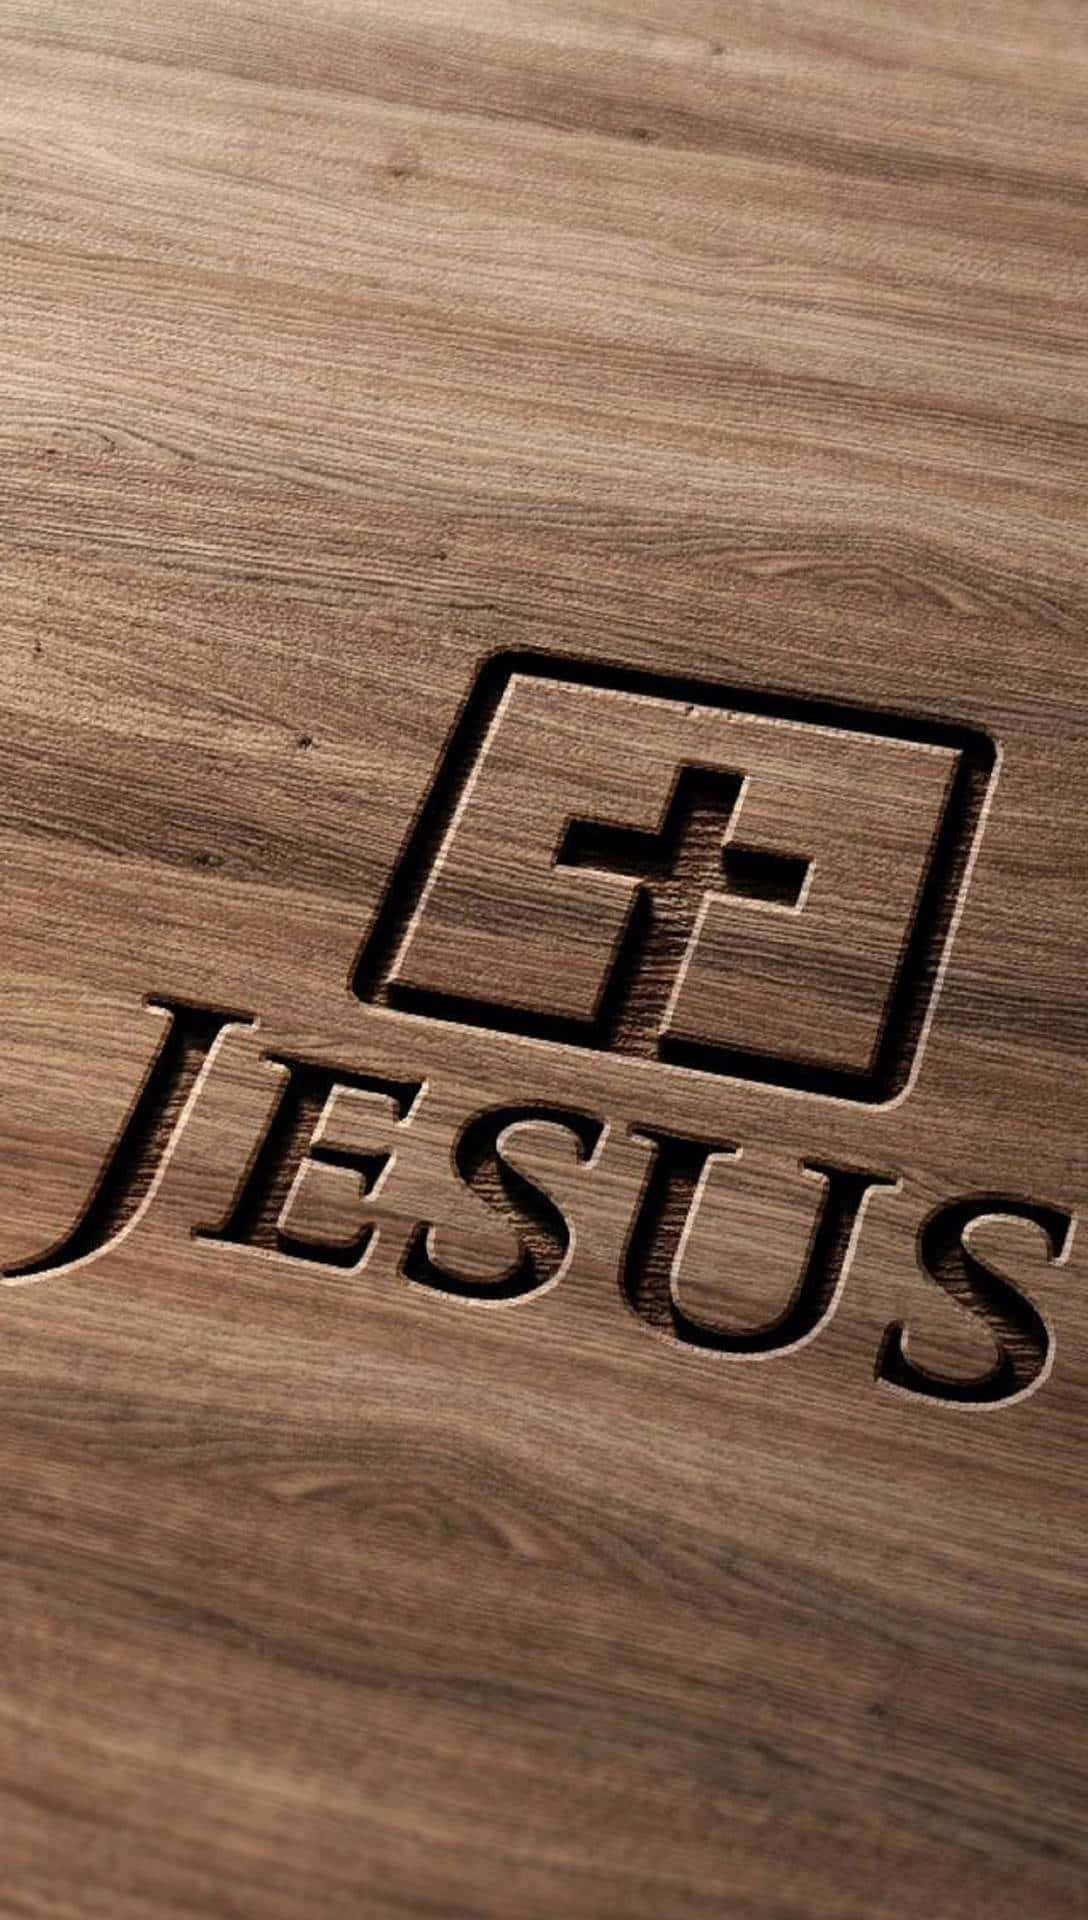 Remembering and Honoring the Name of Jesus Wallpaper